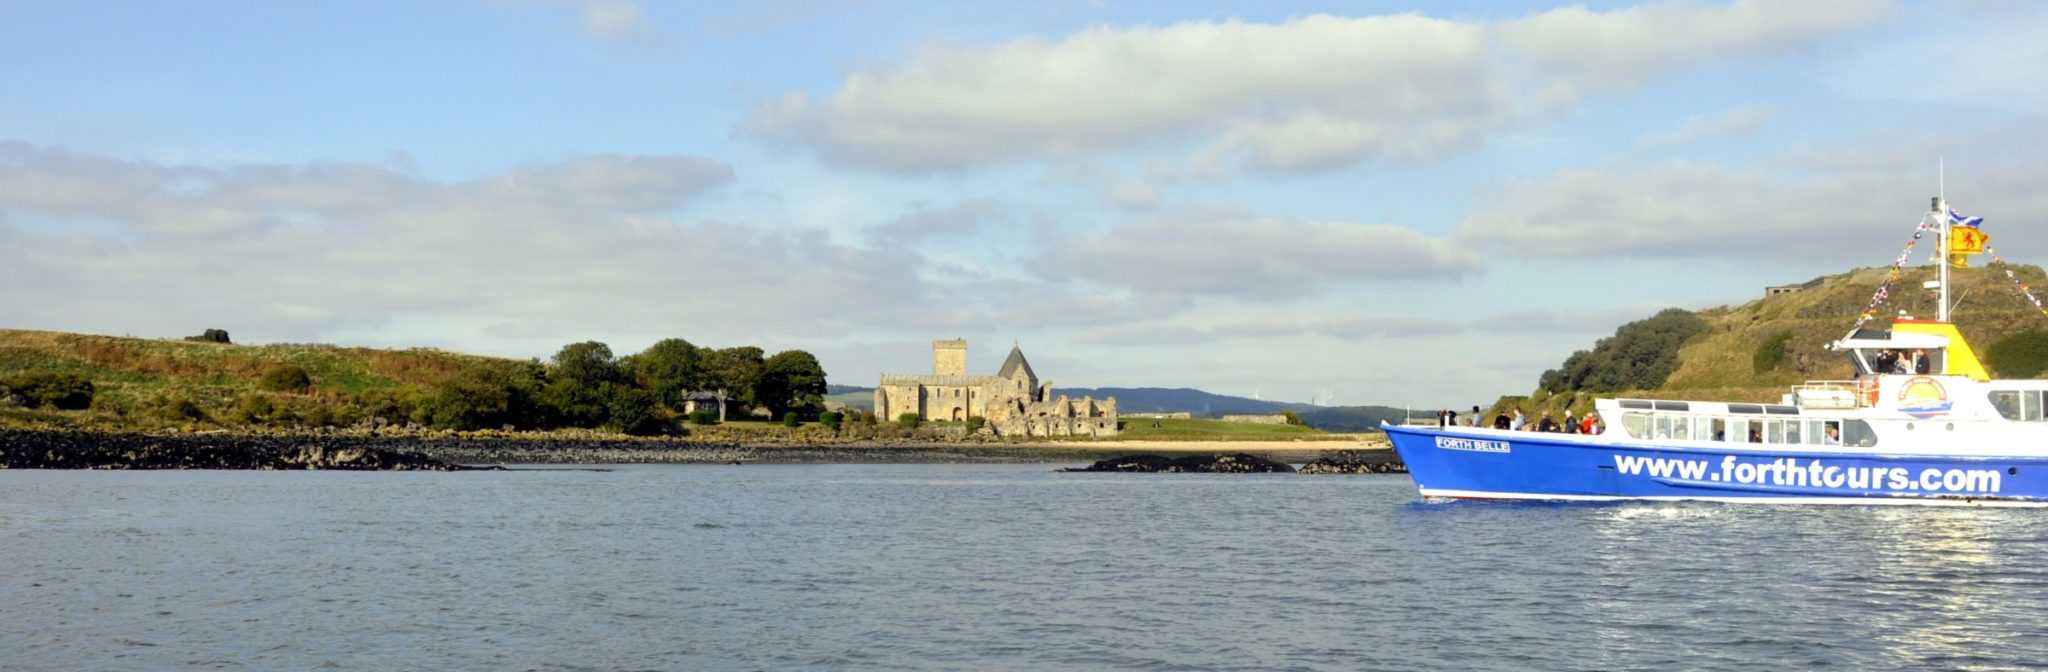 Inchcolm Island & Forth Boat Tours